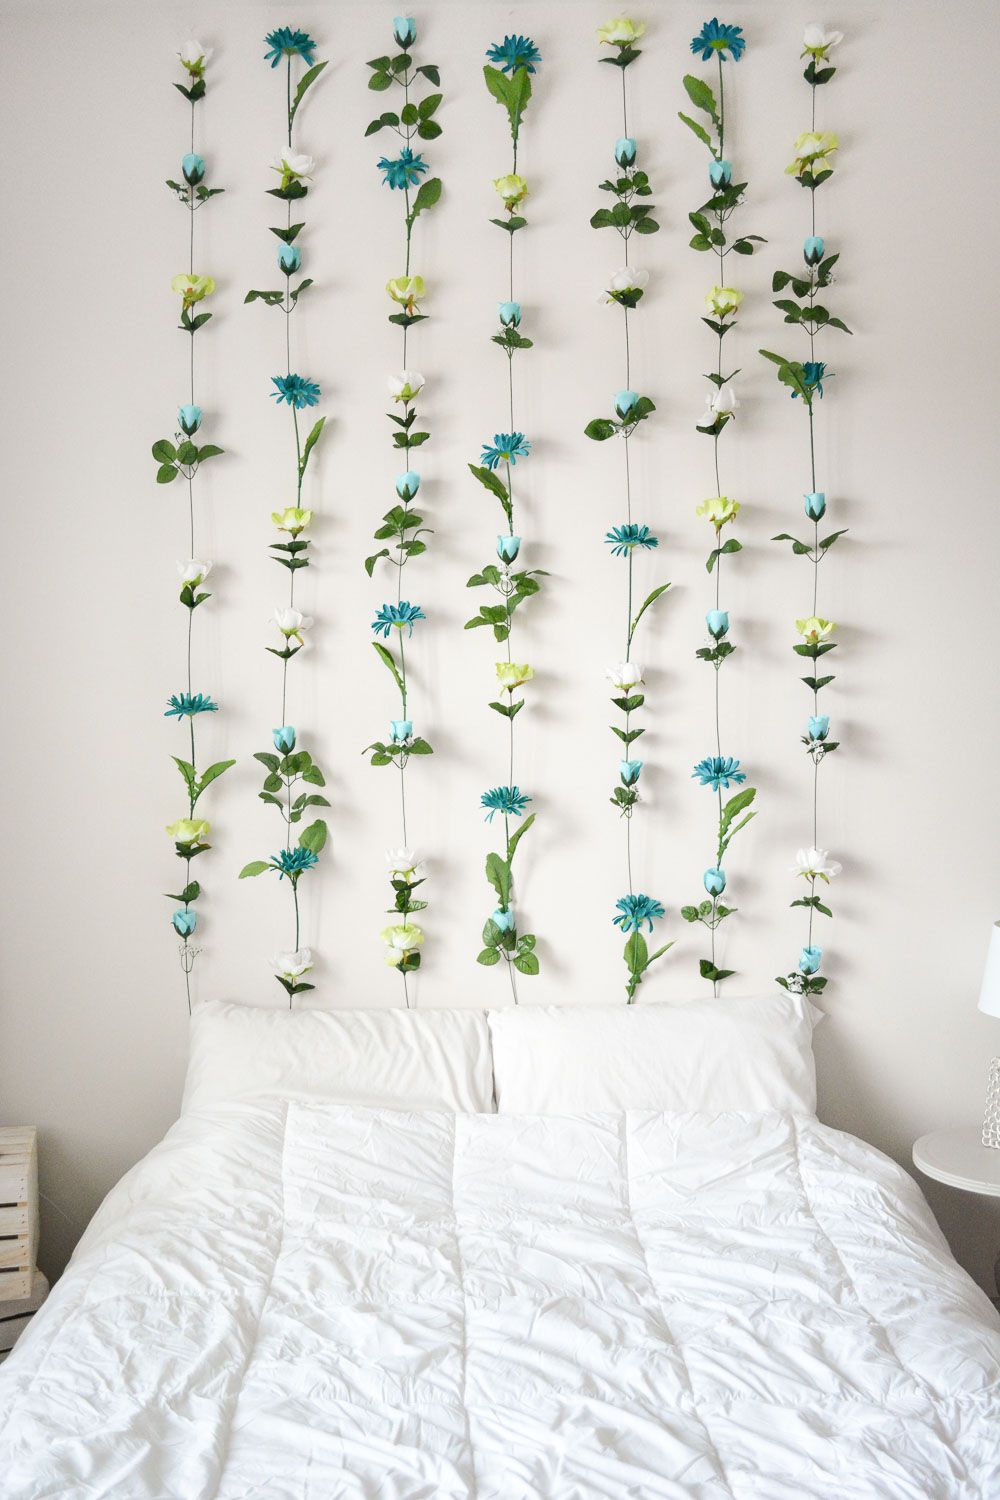 10 Idiot-Proof Ways To DIY Your Wall Decor